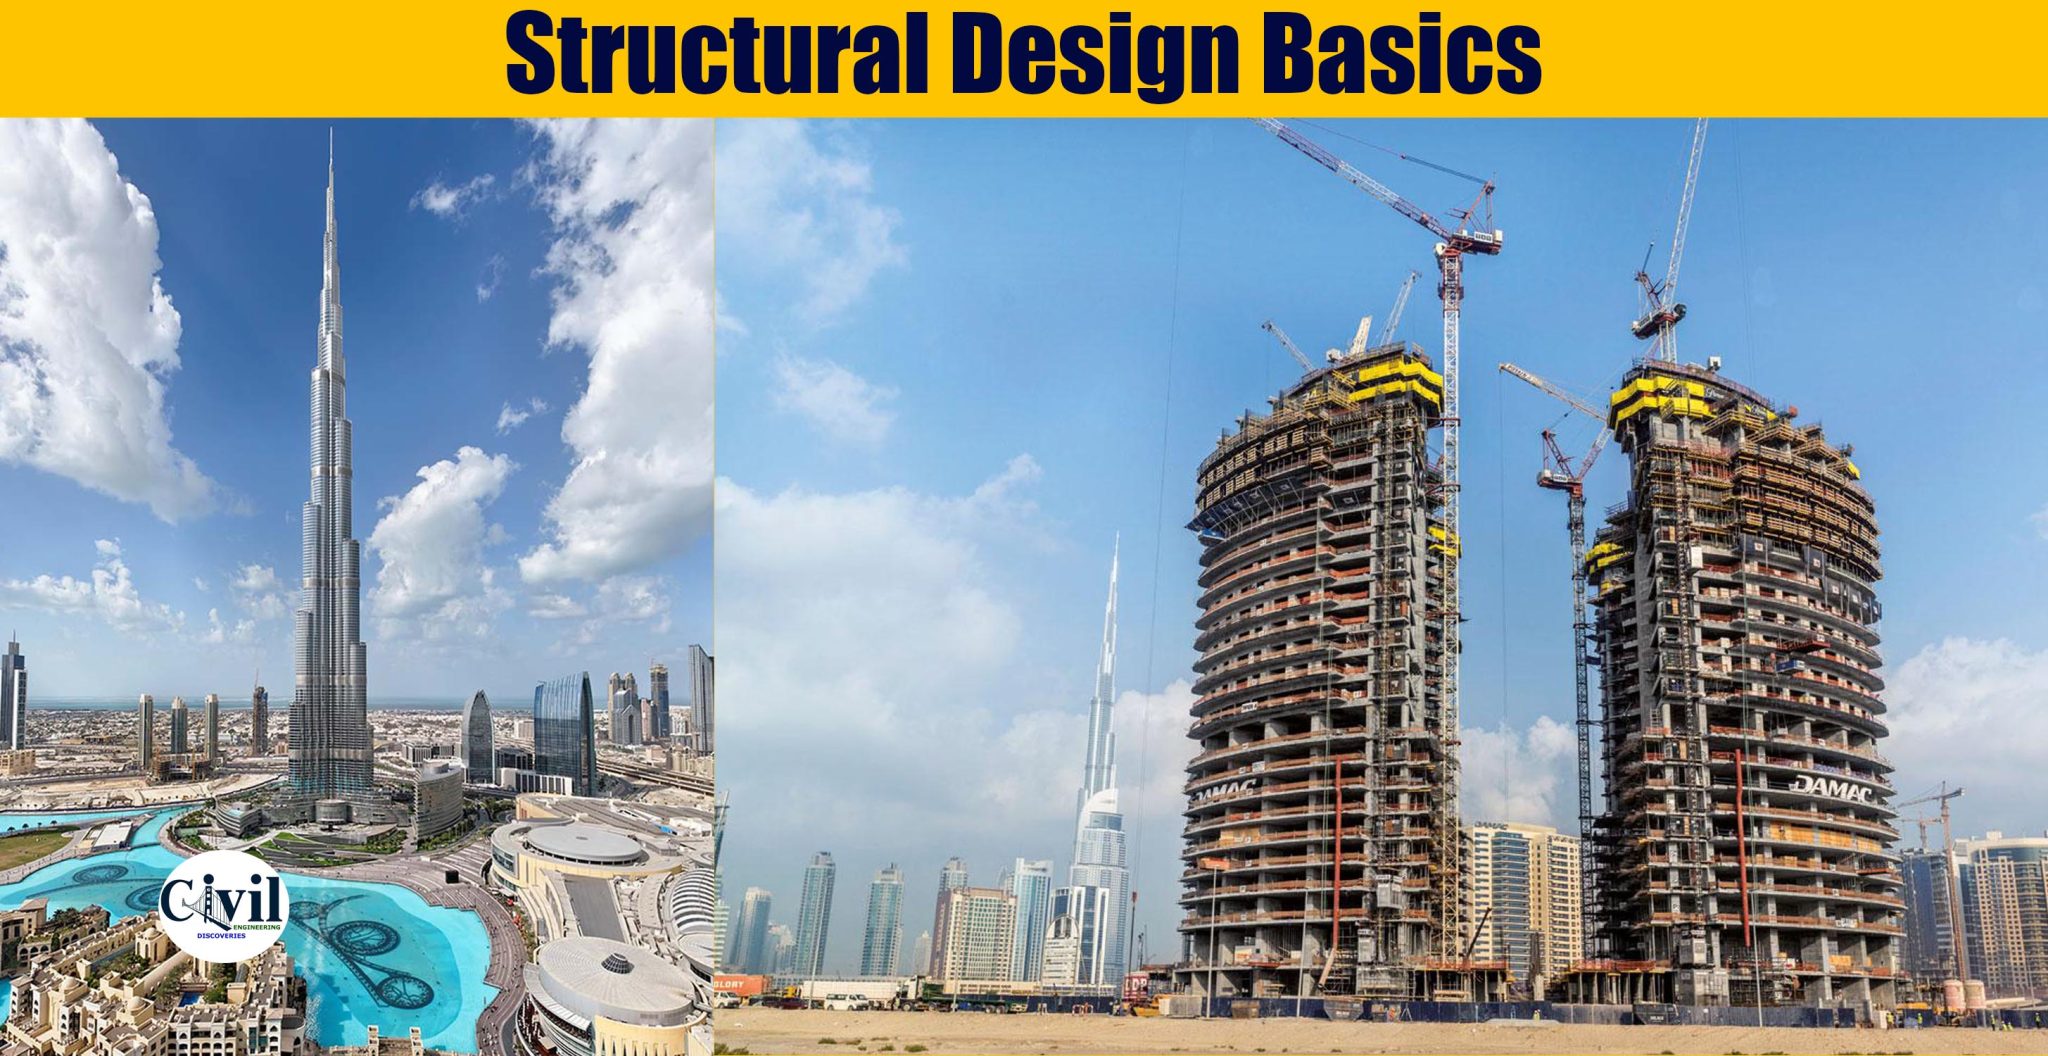 Structural Design Basics - Engineering Discoveries